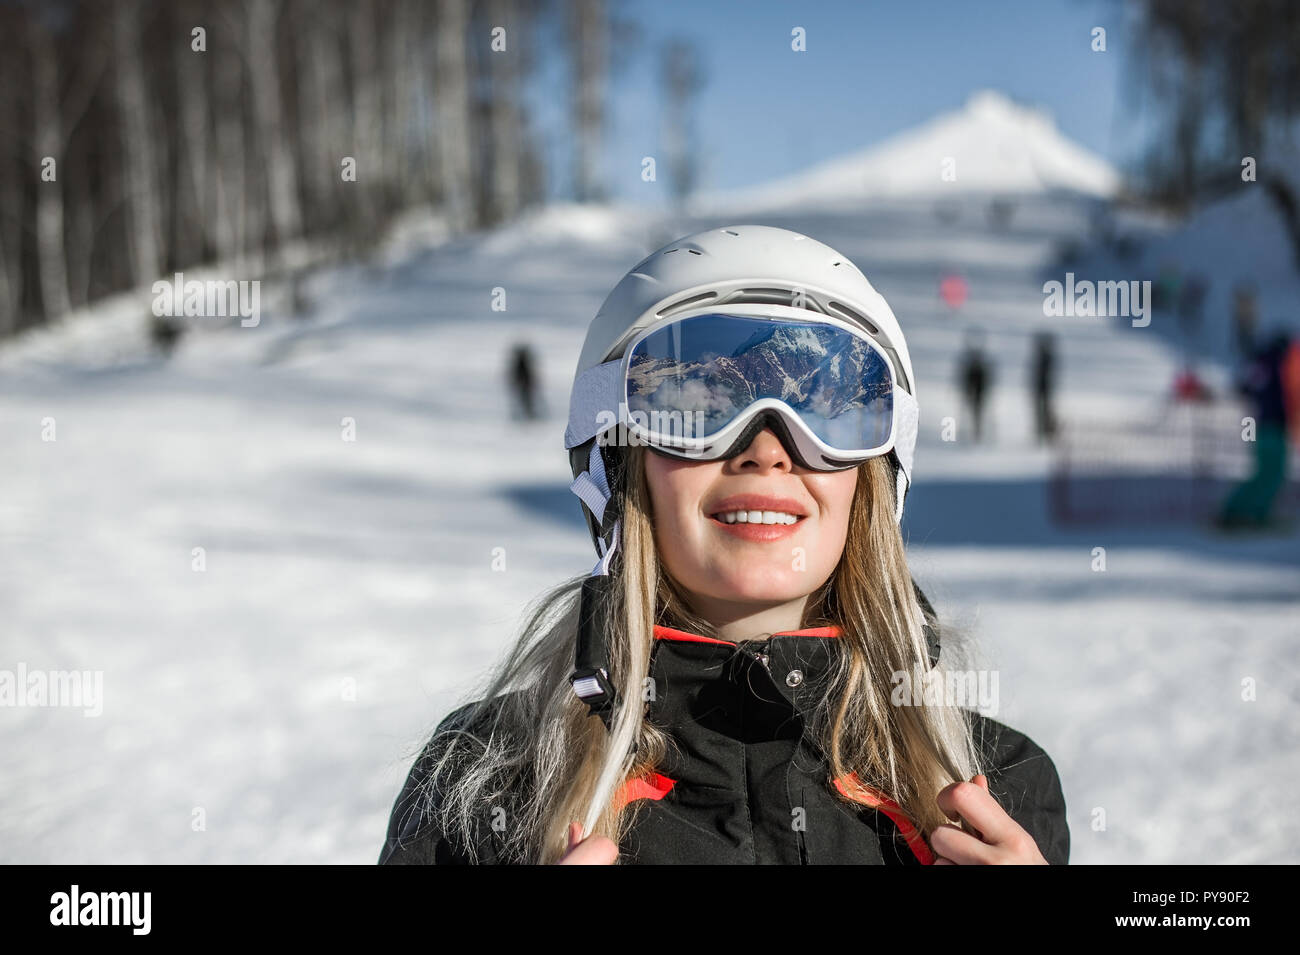 Macro portrait. Young adult woman snowboarder or skier in snow winter on the mountainside the ski mask or goggles reflect the mountains Stock Photo